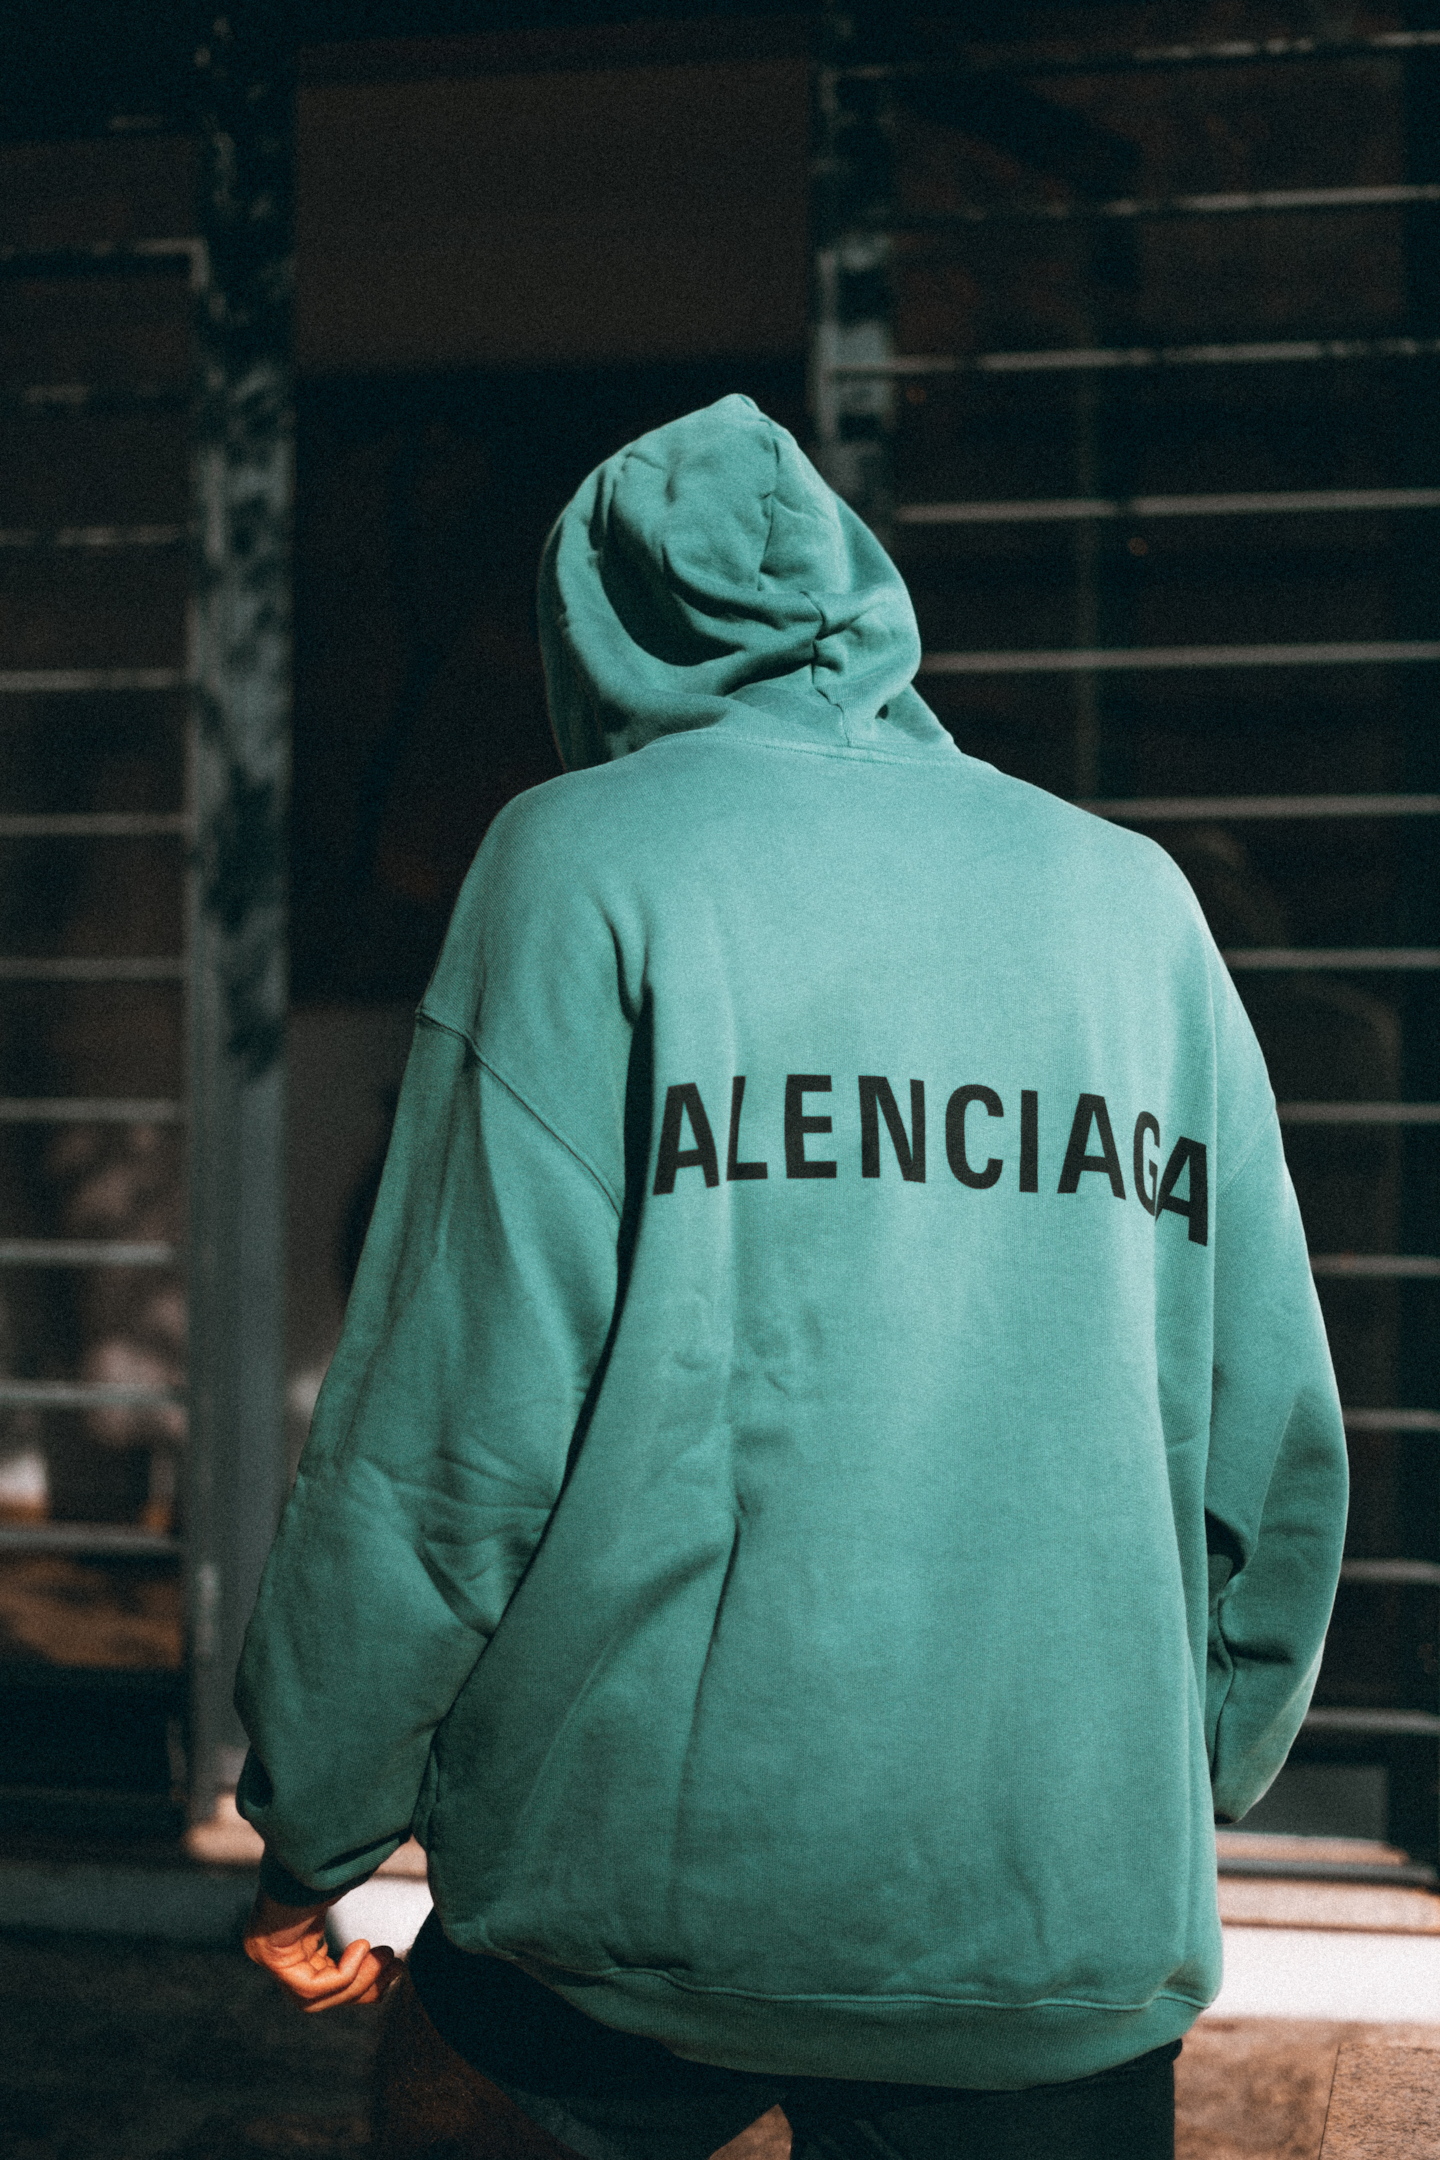 Balenciaga, currently owned by Kering, continues to be on top with their trendy luxury pieces | Photo by lawlesscapture from Pexels